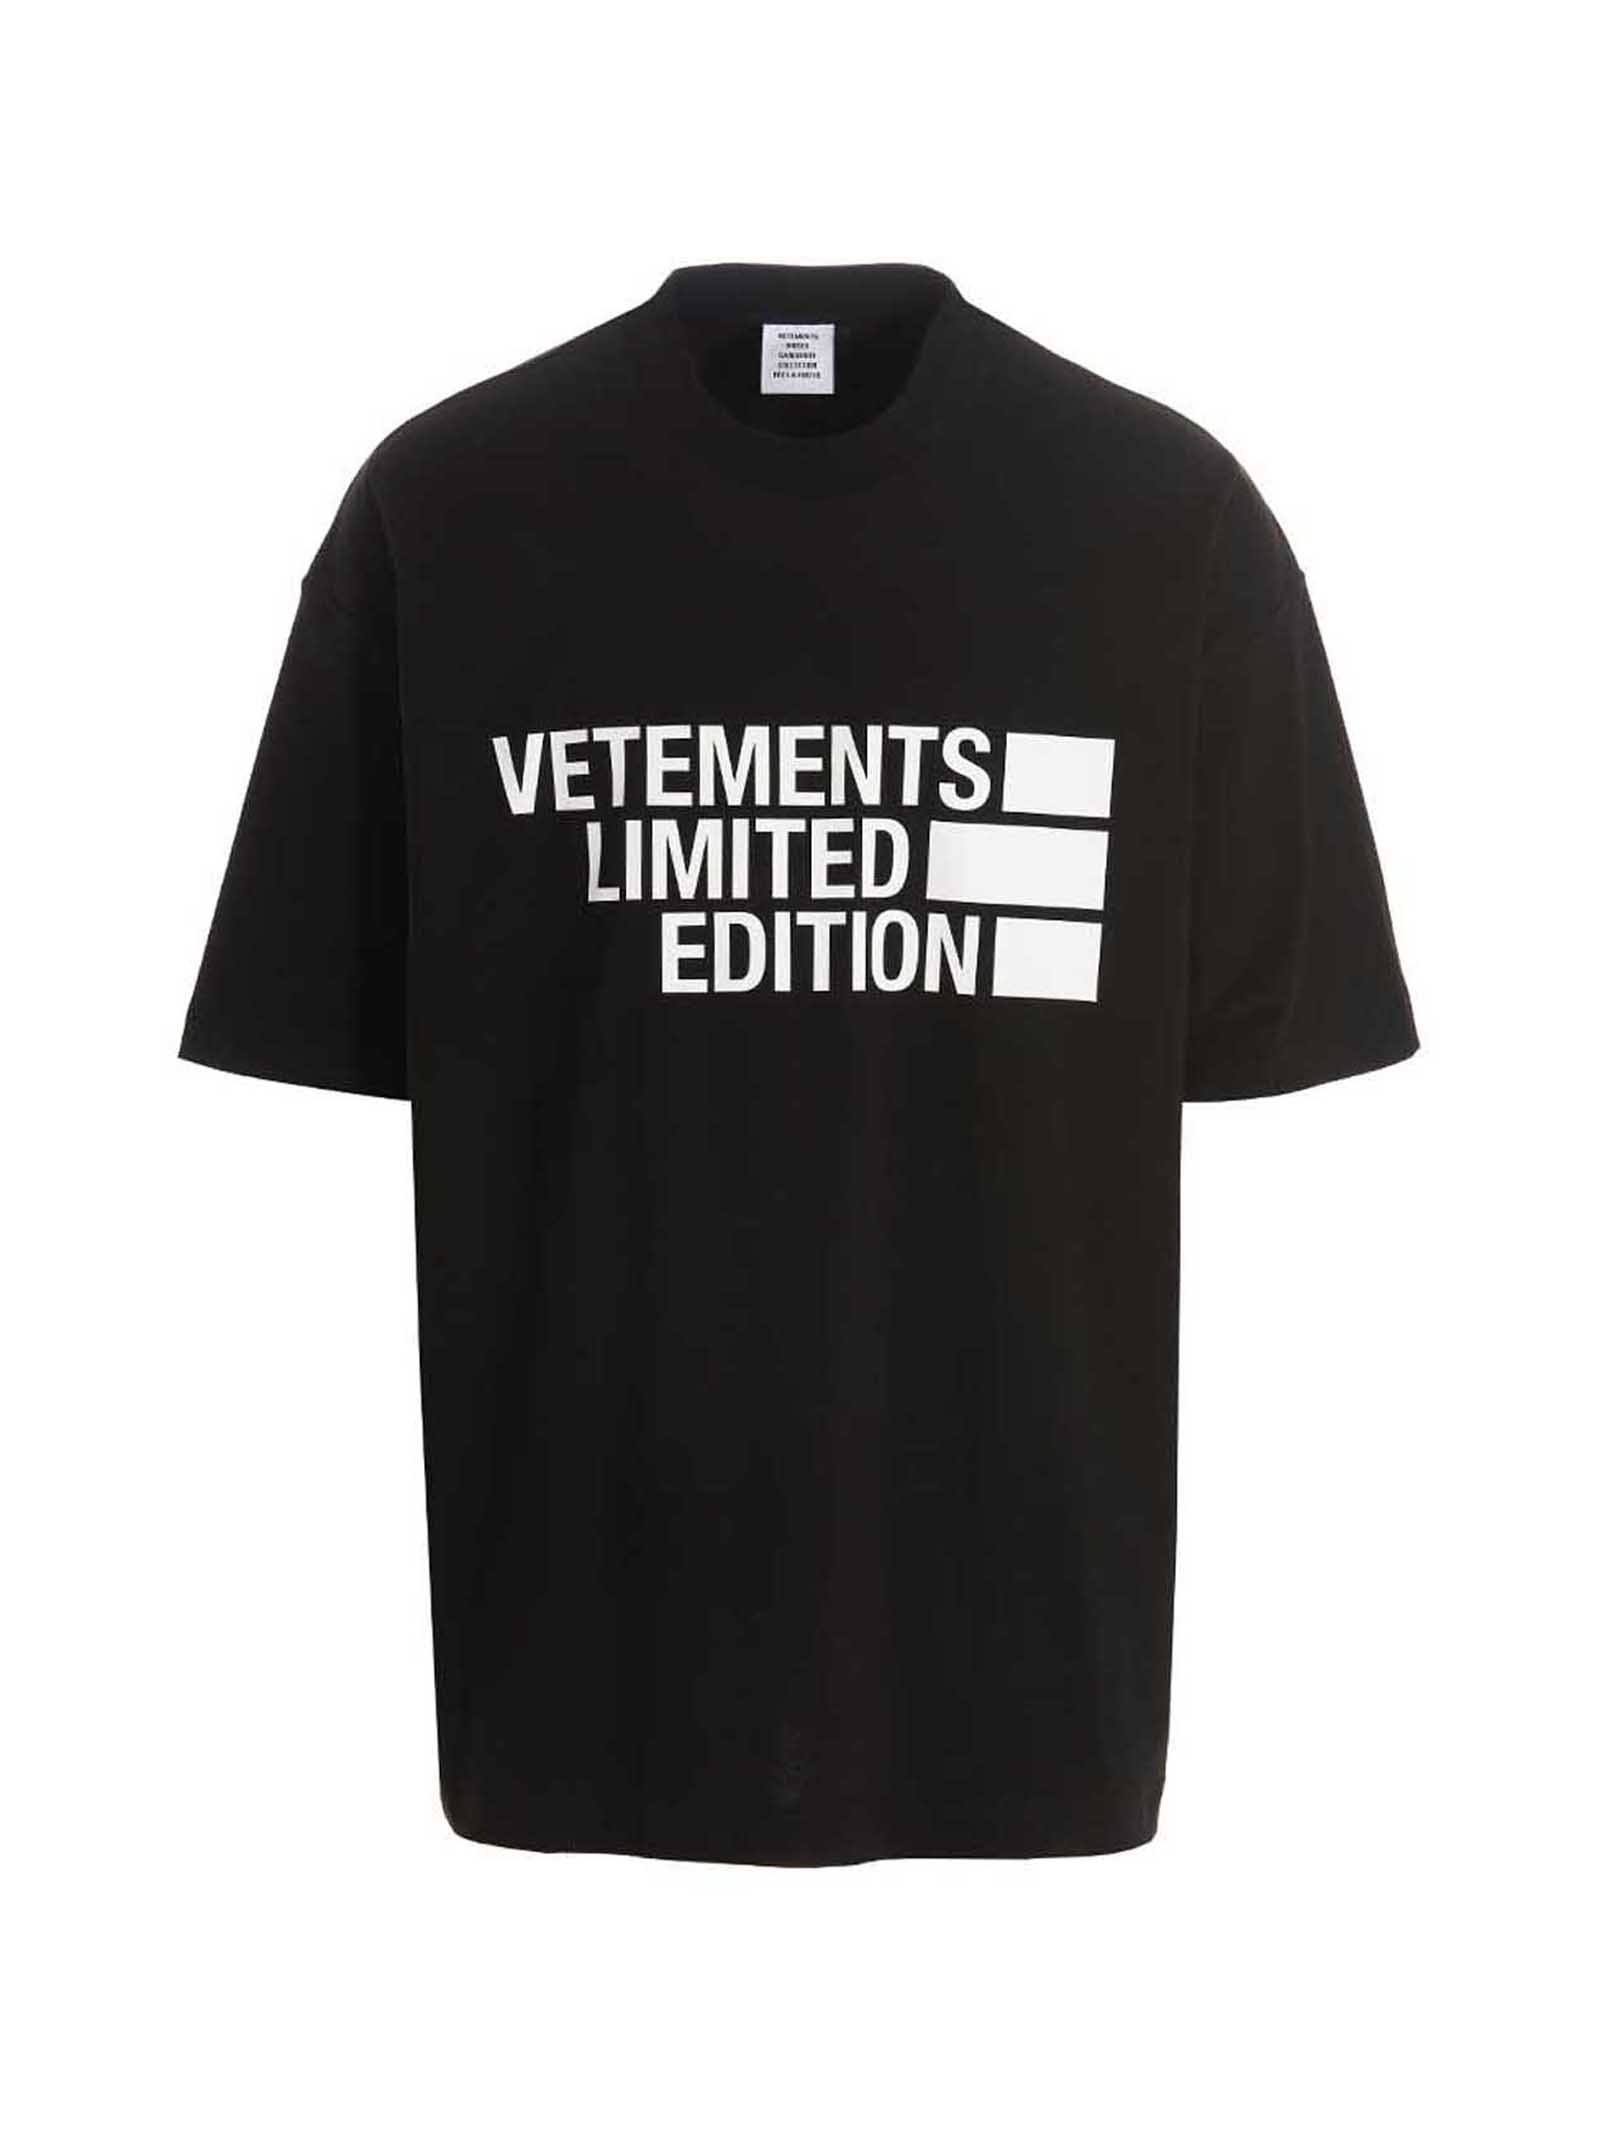 VETEMENTS T-shirt limited Edition